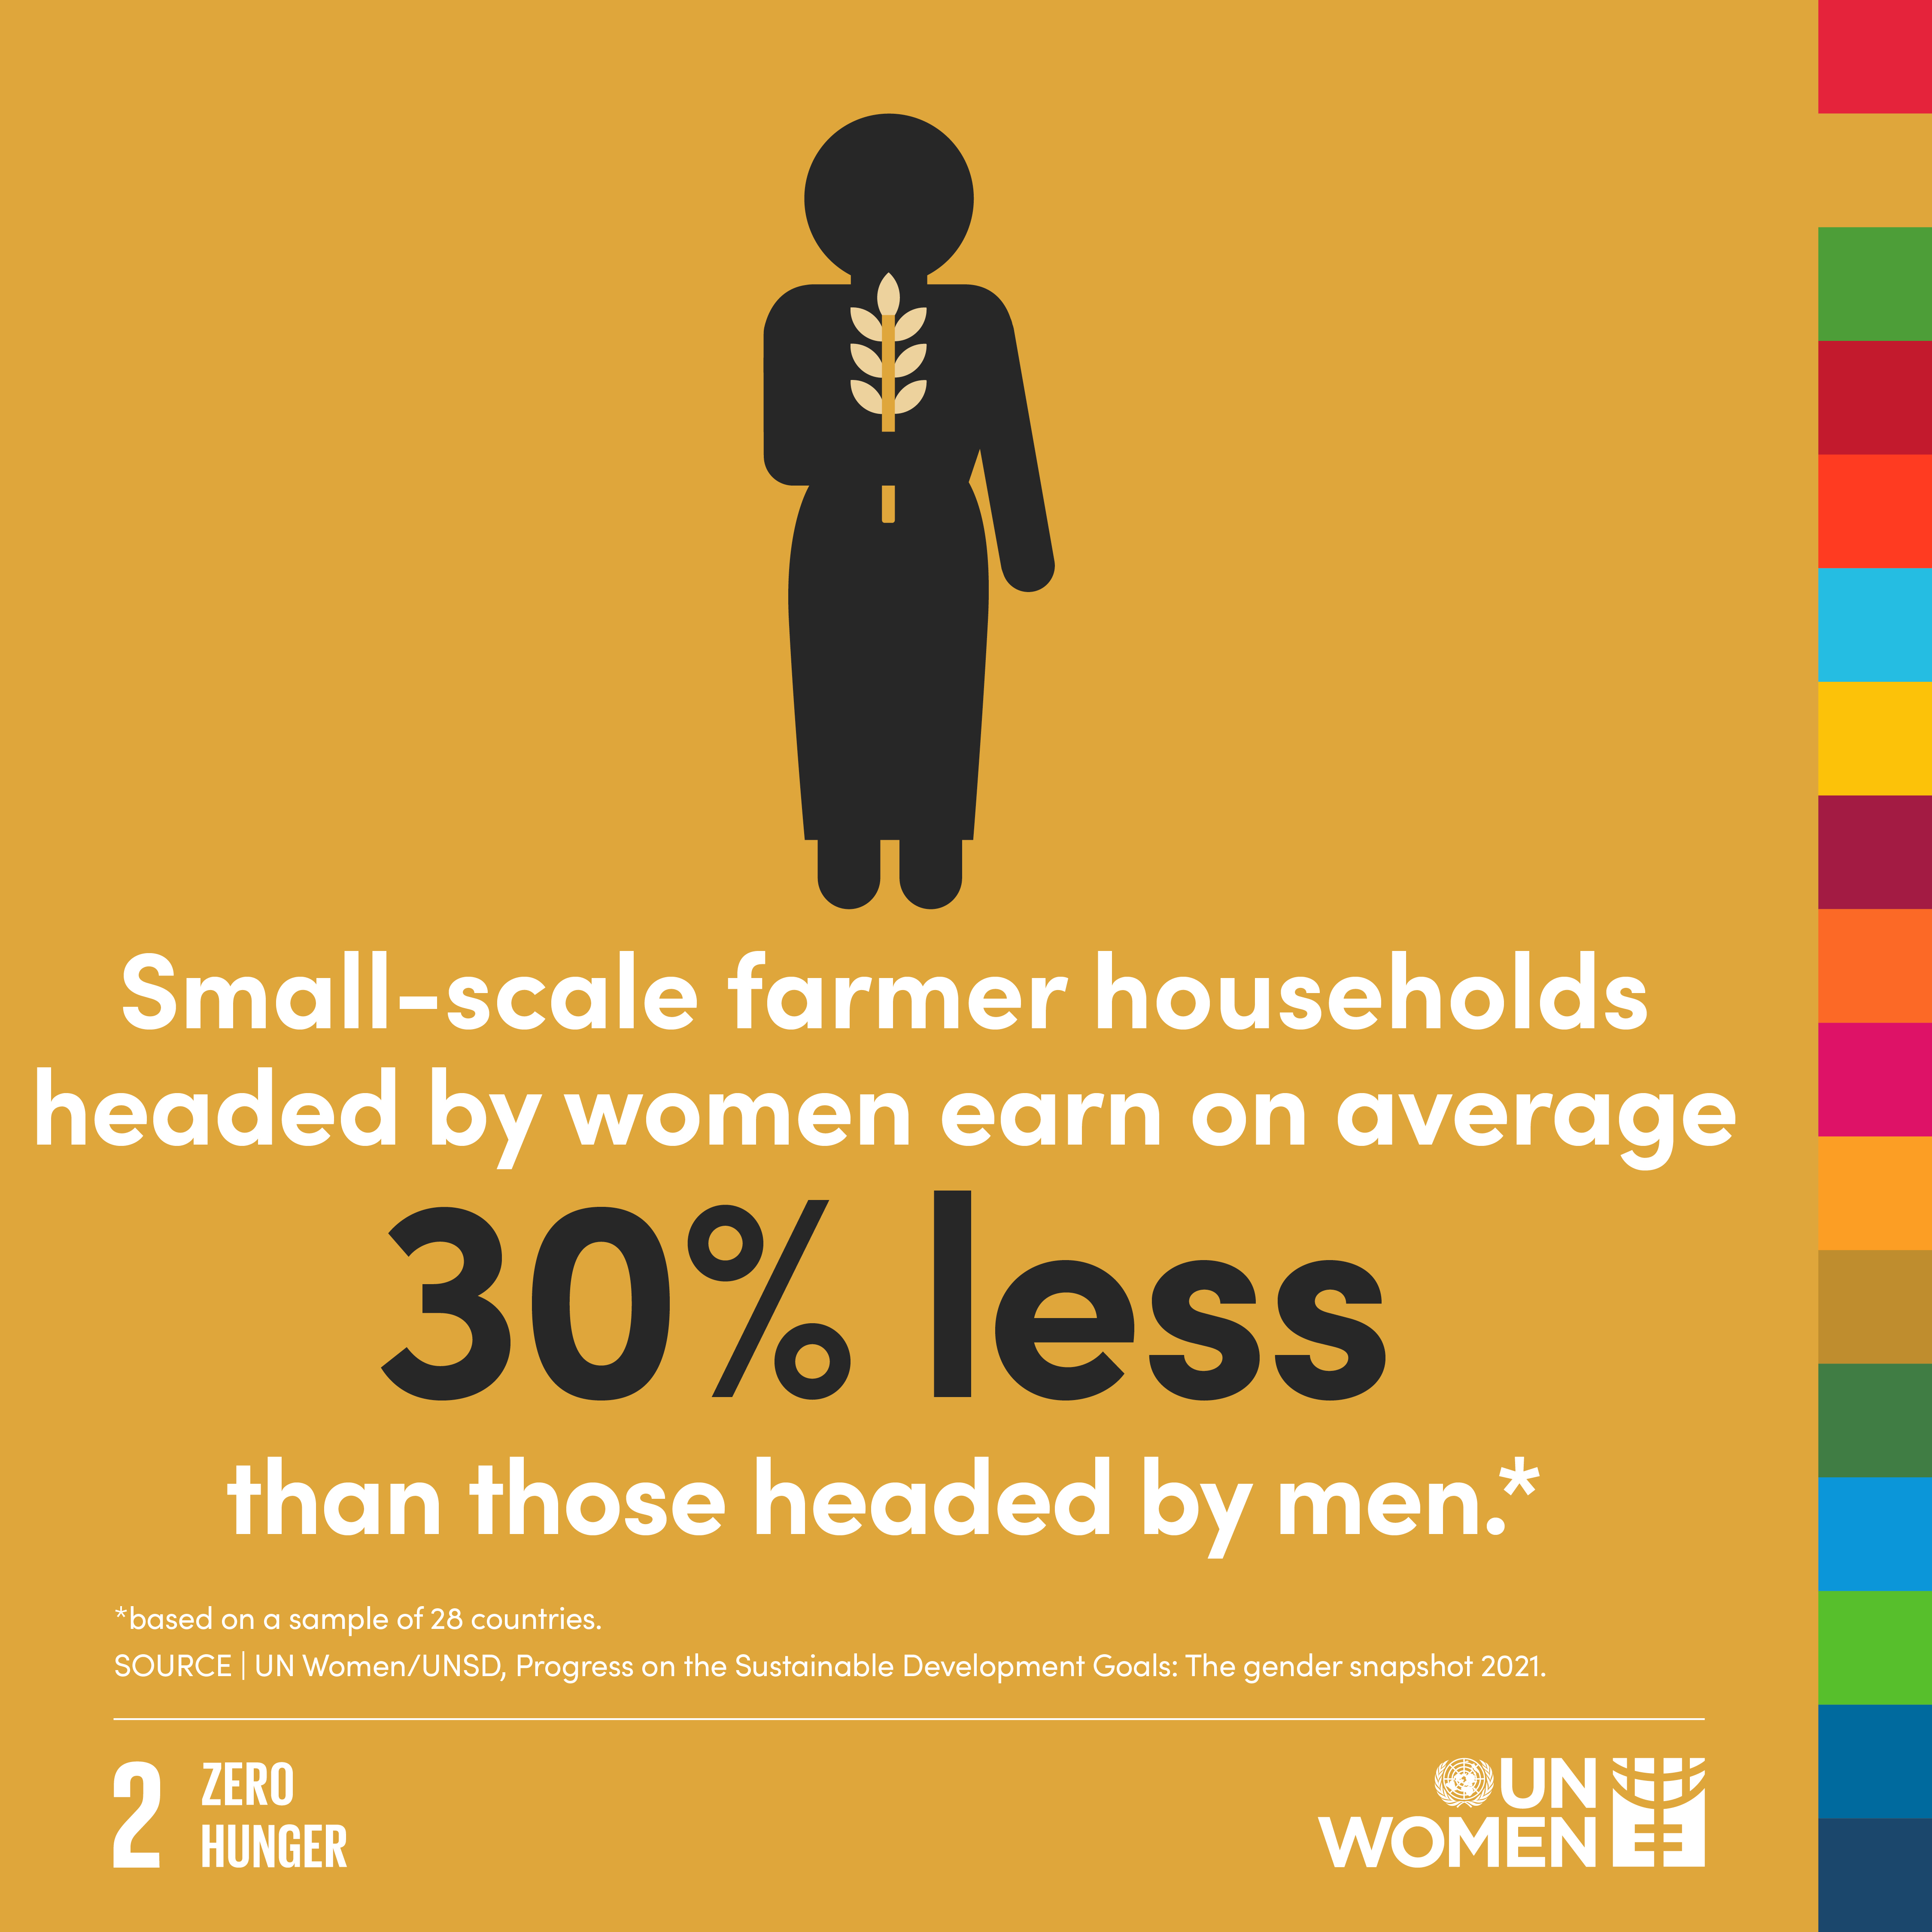 Small-scale farmer households headed by women earn on average 30% less than those headed by men.